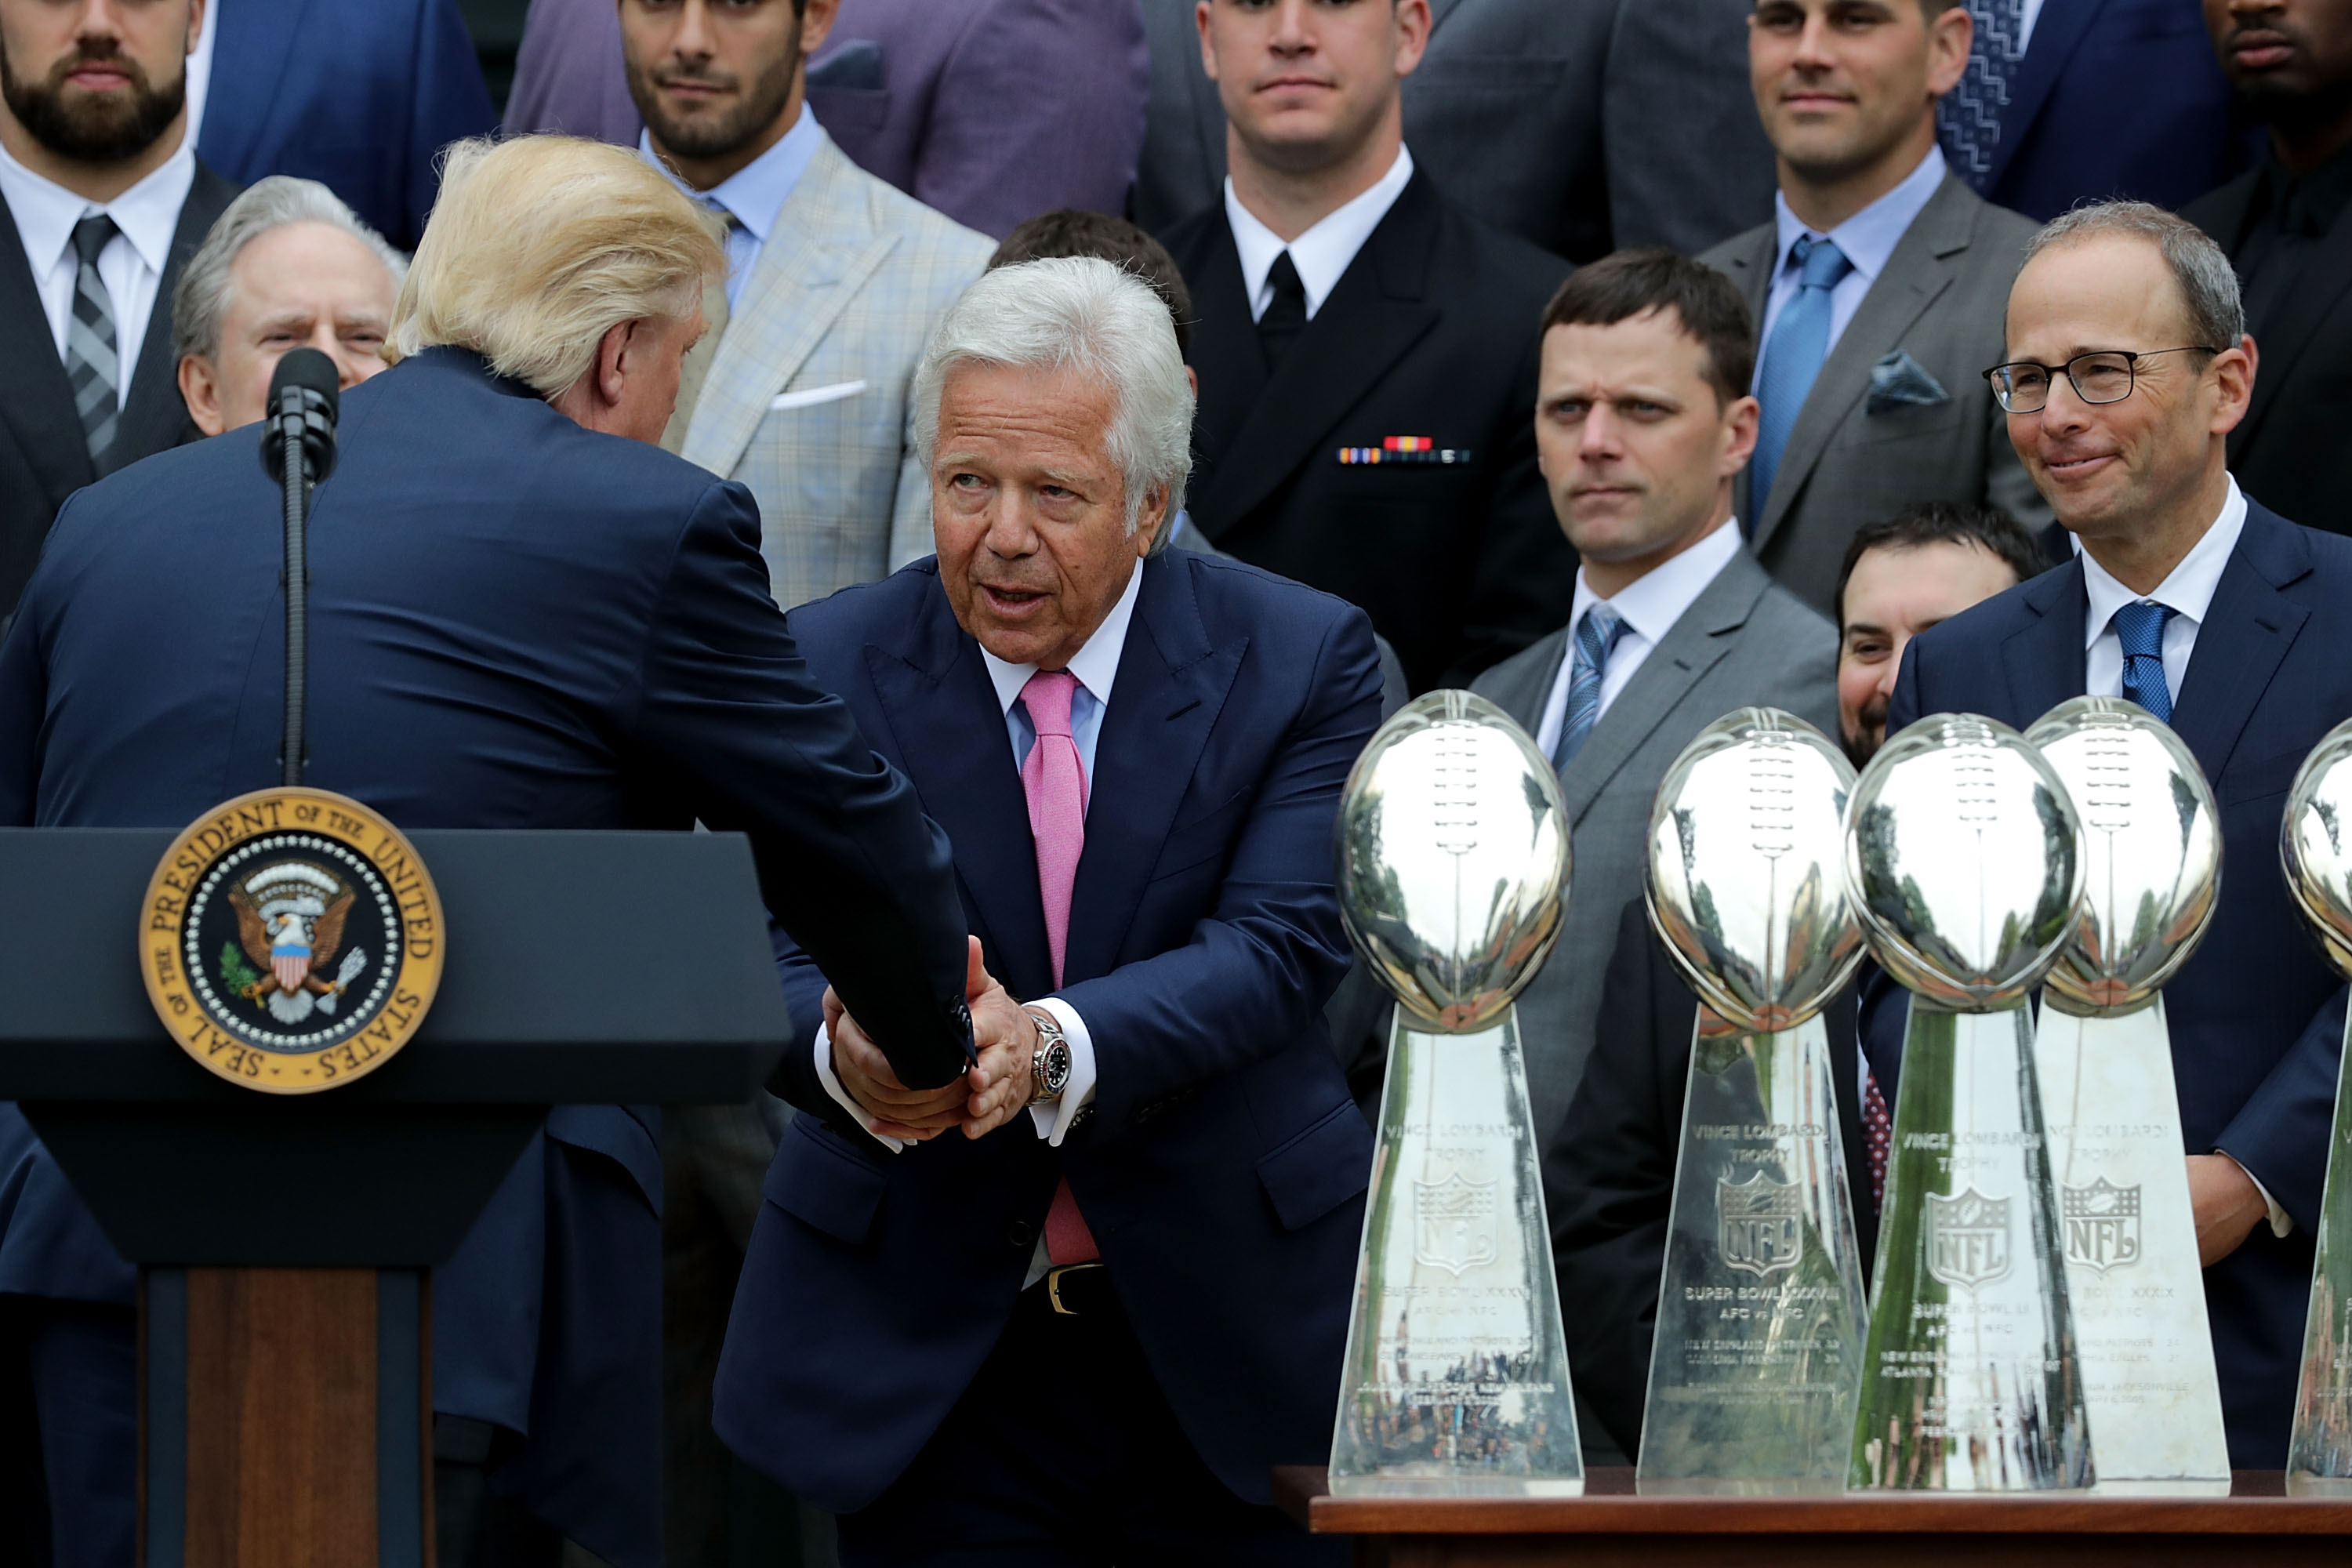 Robert Kraft Super Bowl Ring Auction Hits $1 Million With 8 Days To Go